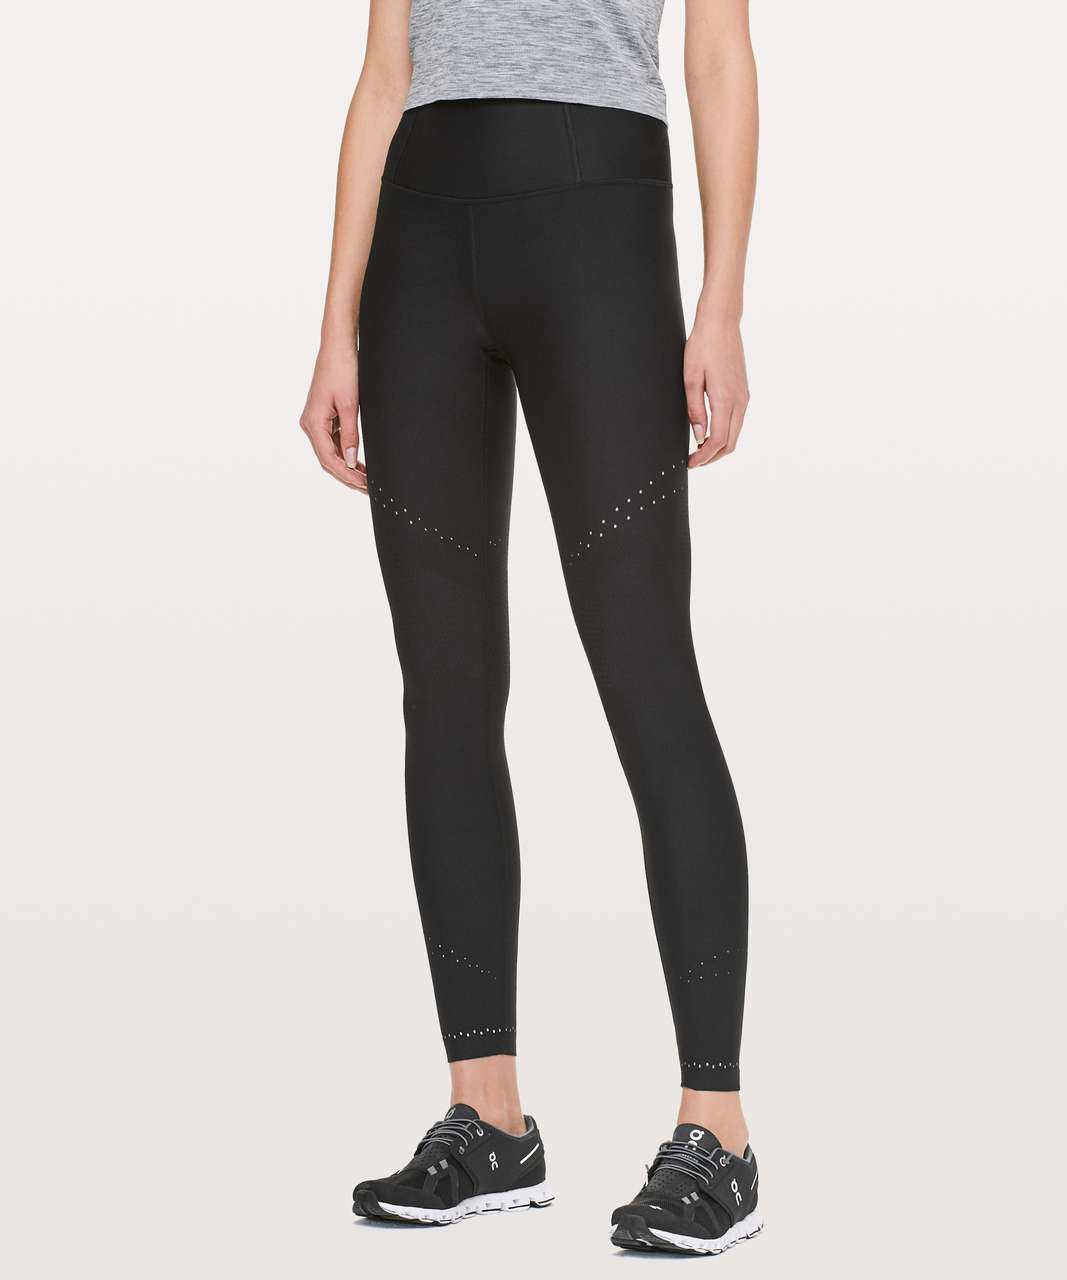 Lululemon Zoned In Tight *27" - Black (First Release)